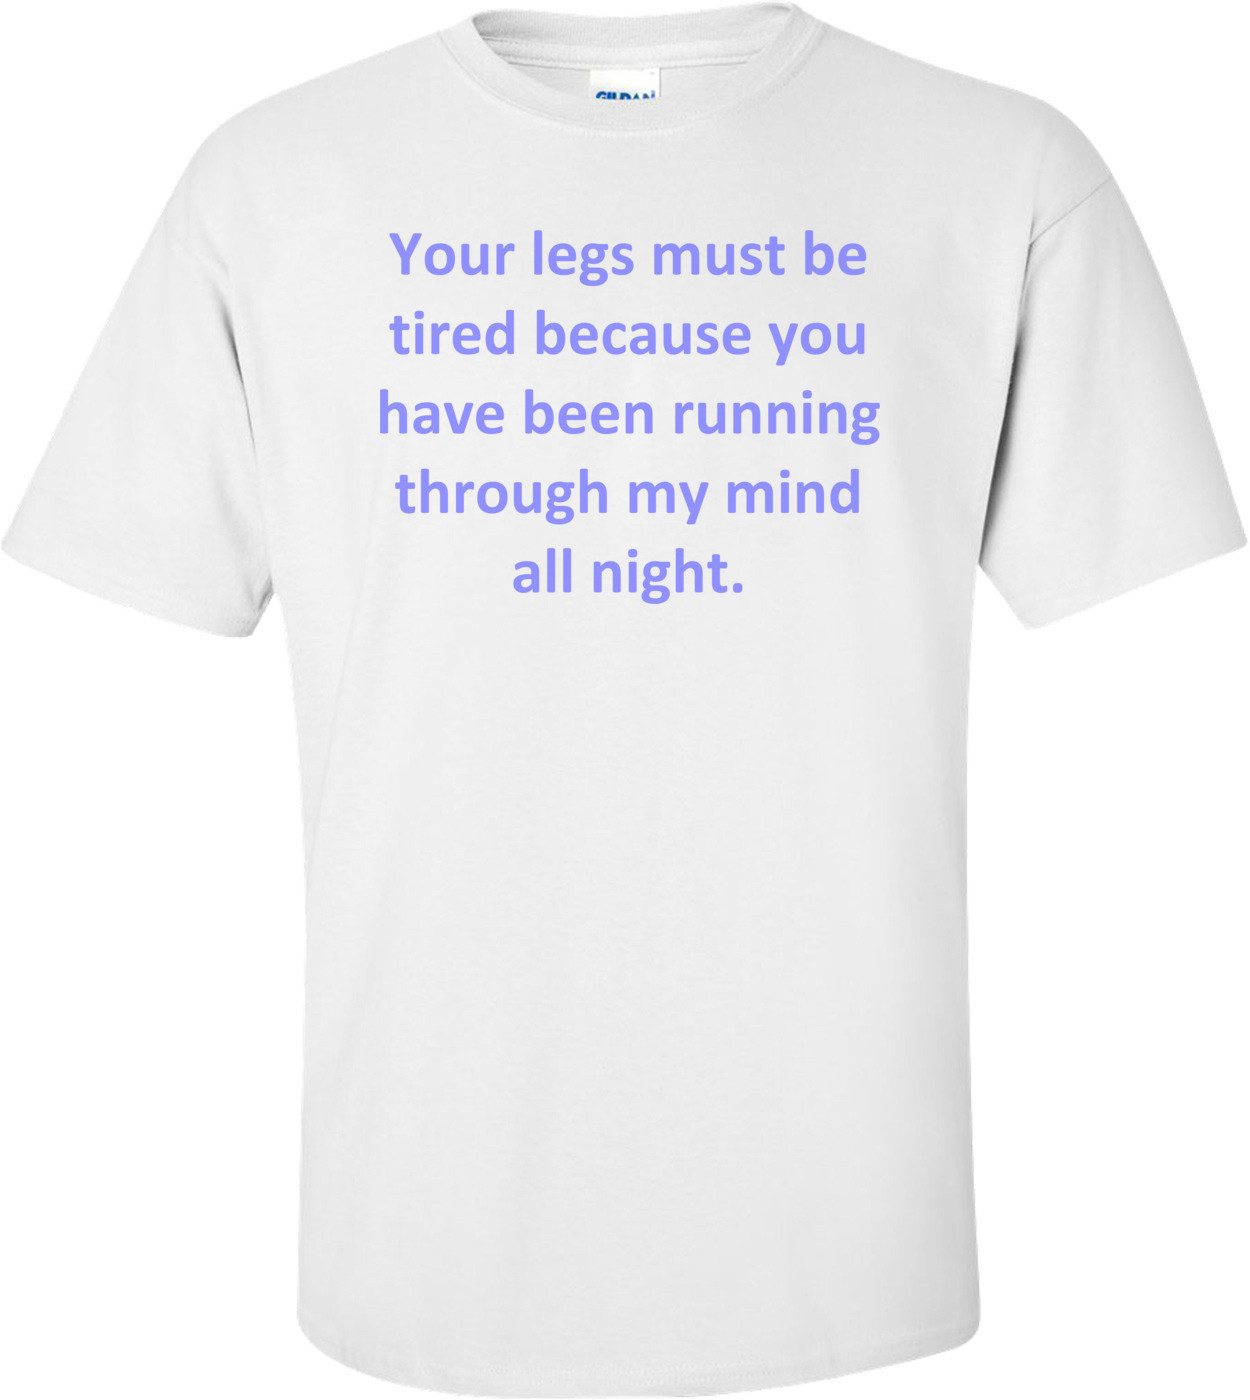 Your legs must be tired because you have been running through my mind all night. Shirt